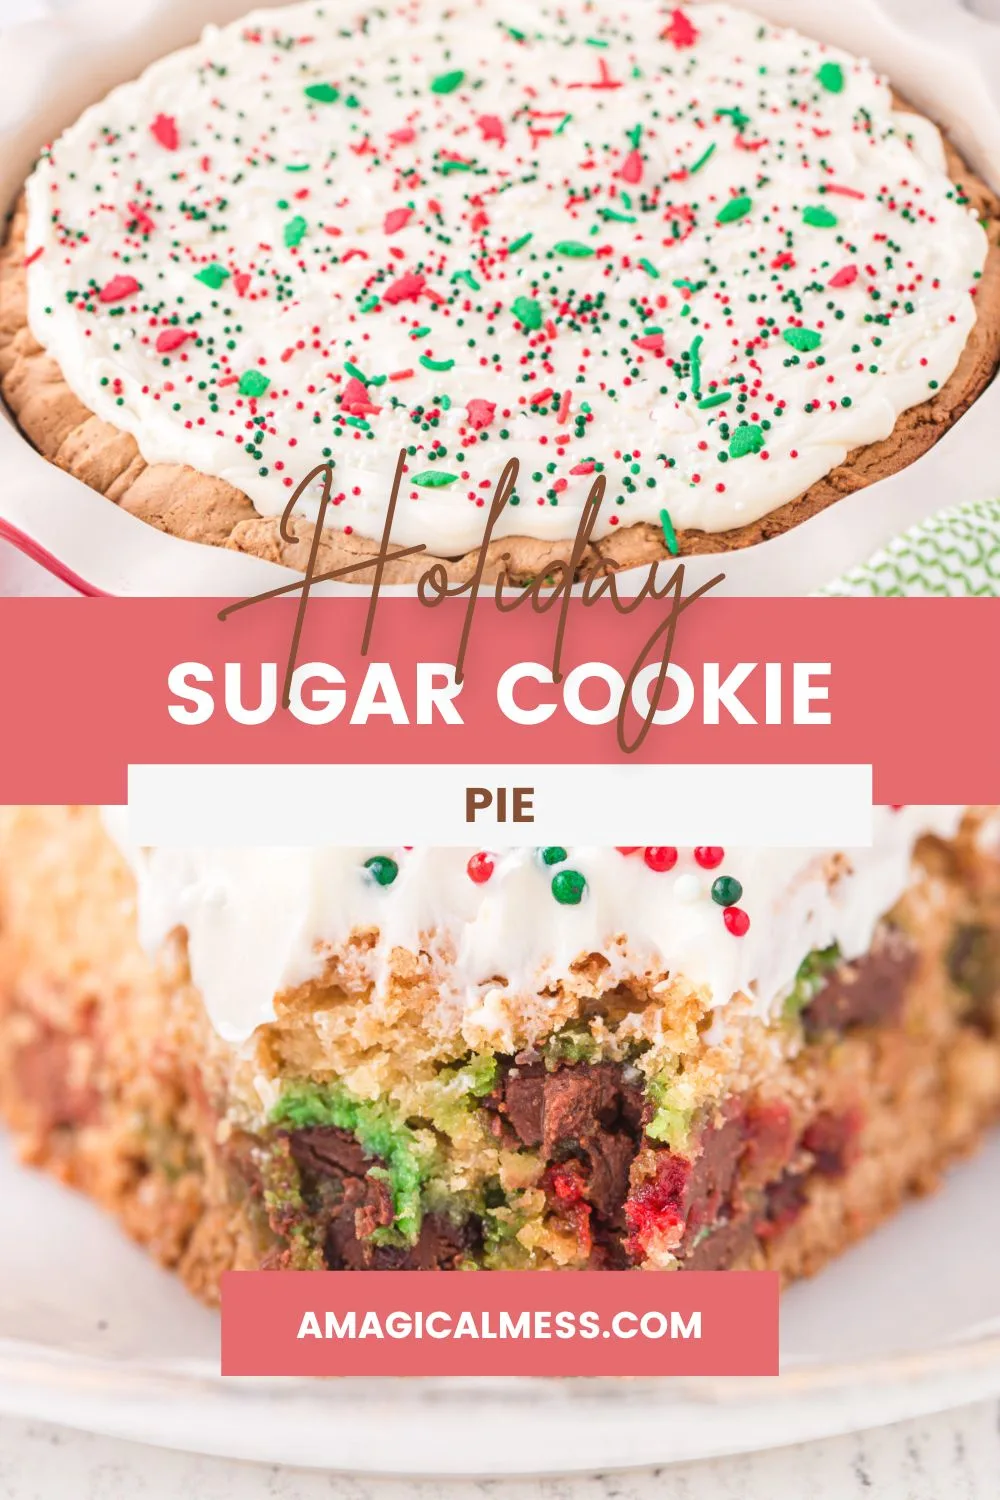 Sugar cookie pie and a bite taken out showing the holiday M&M candies.